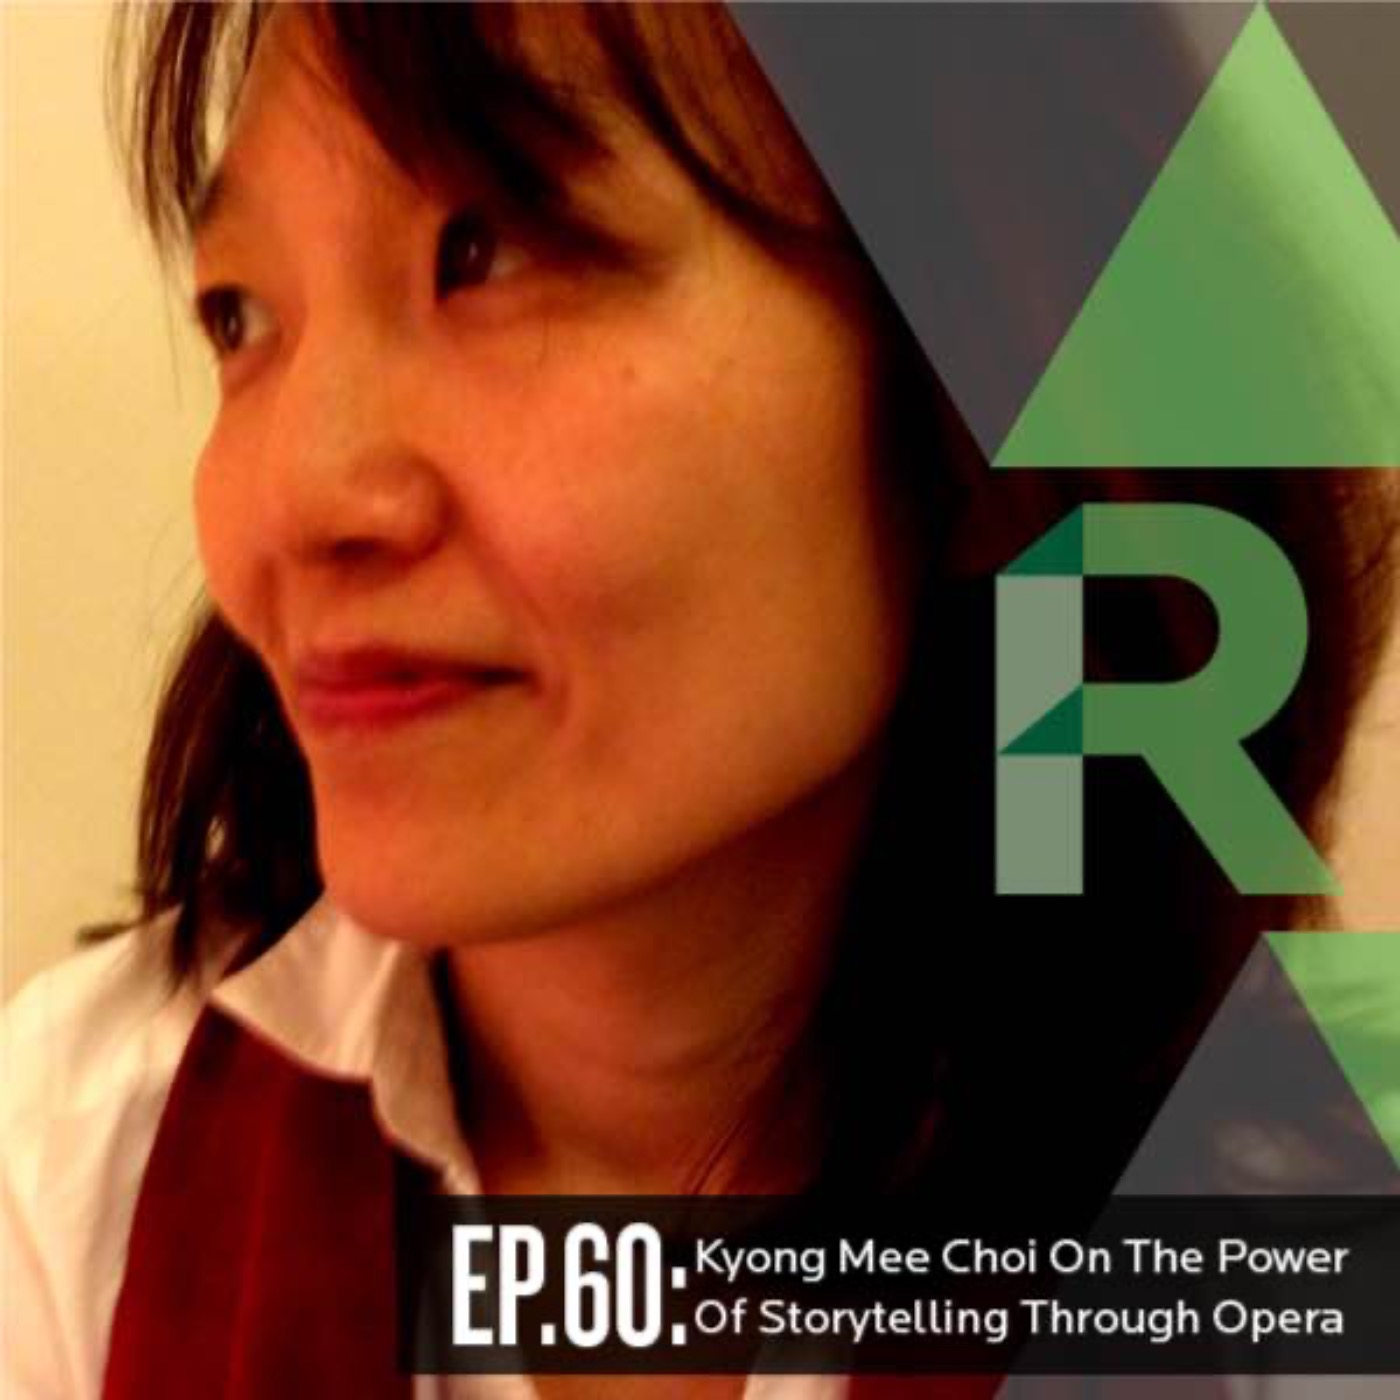 EP. 60: Kyong Mee Choi On The Power Of Storytelling Through Opera